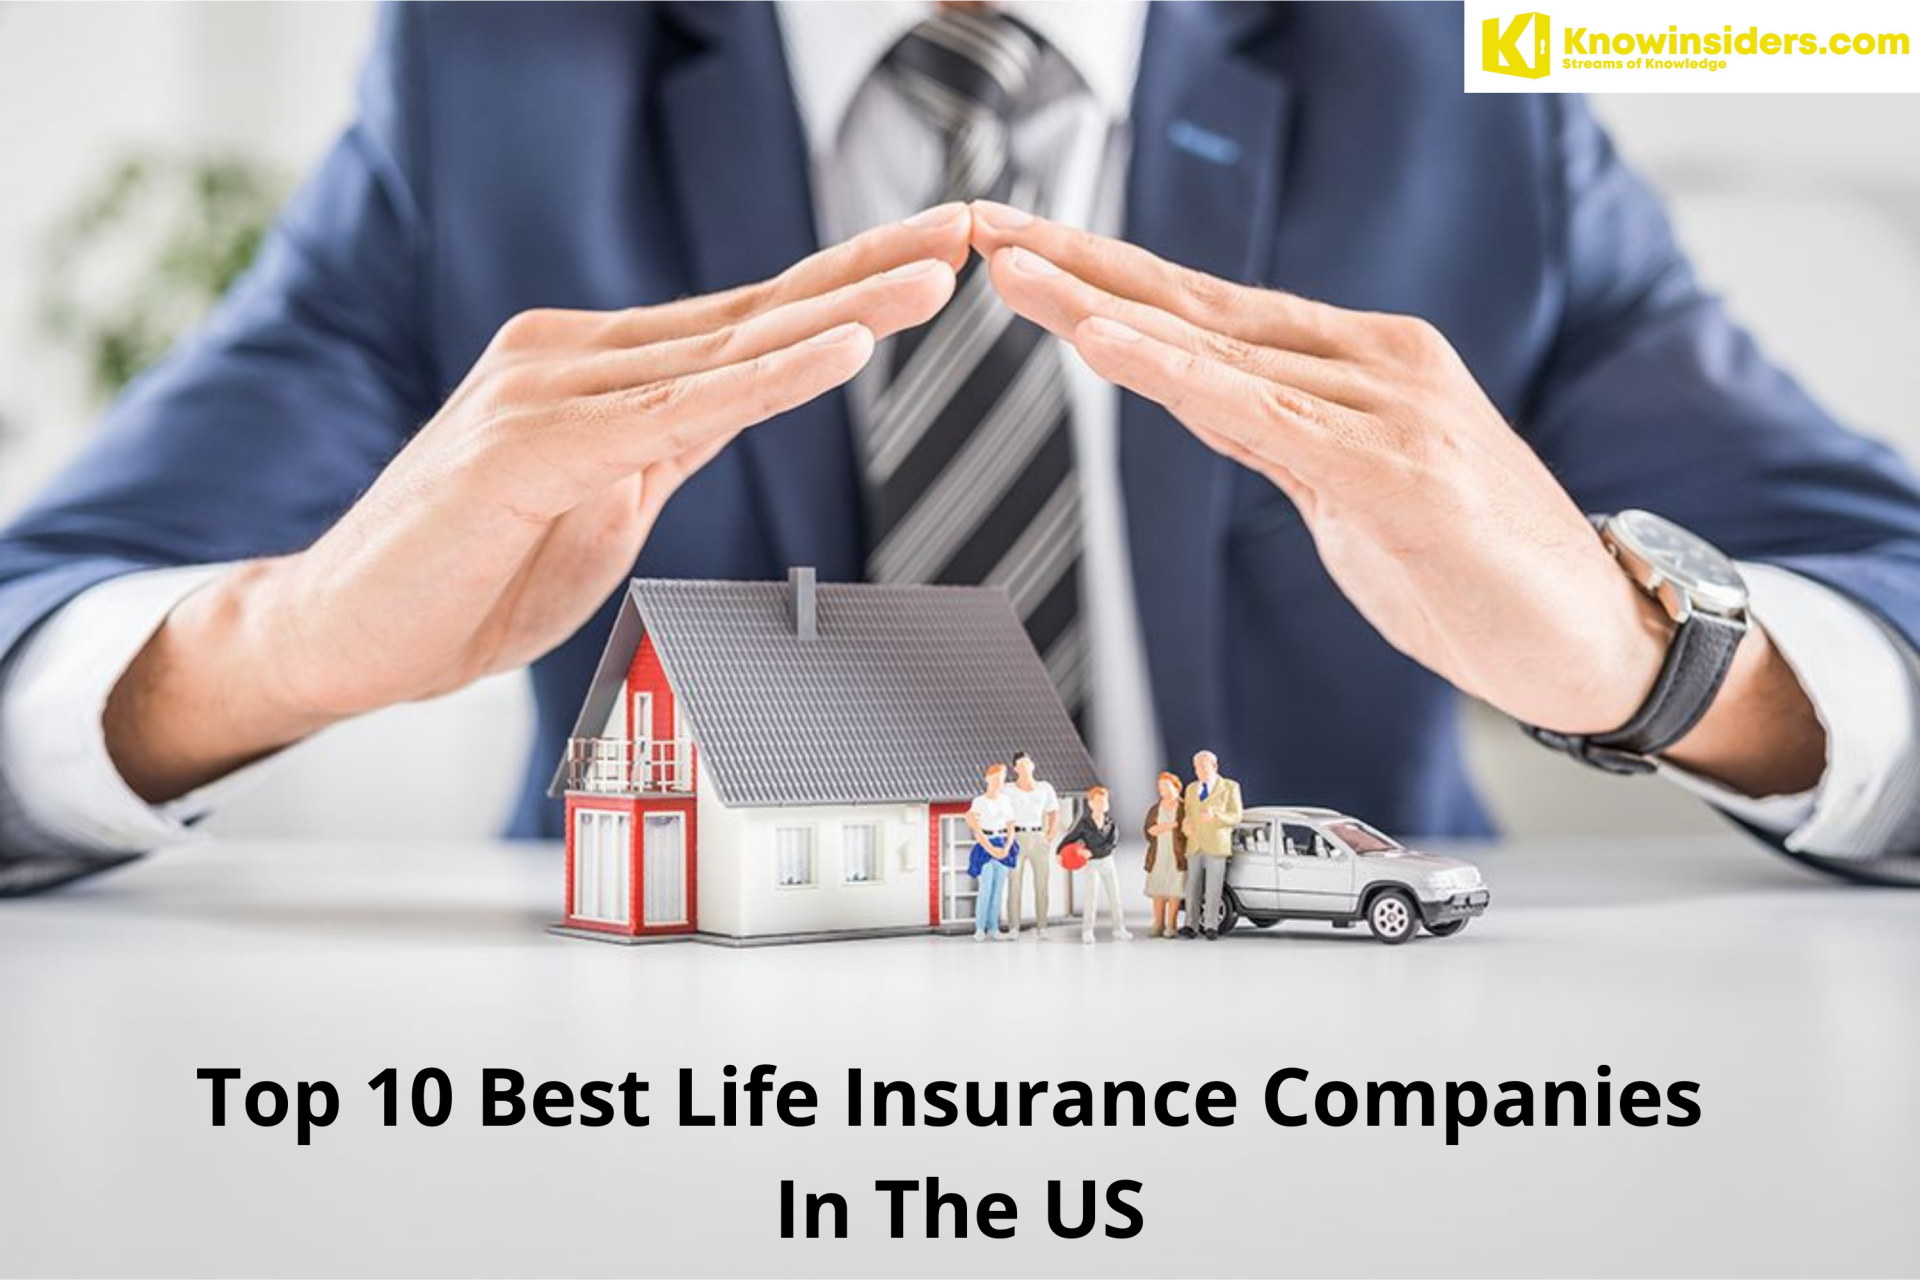 Top 10 Best Life Insurance Companies In The United States